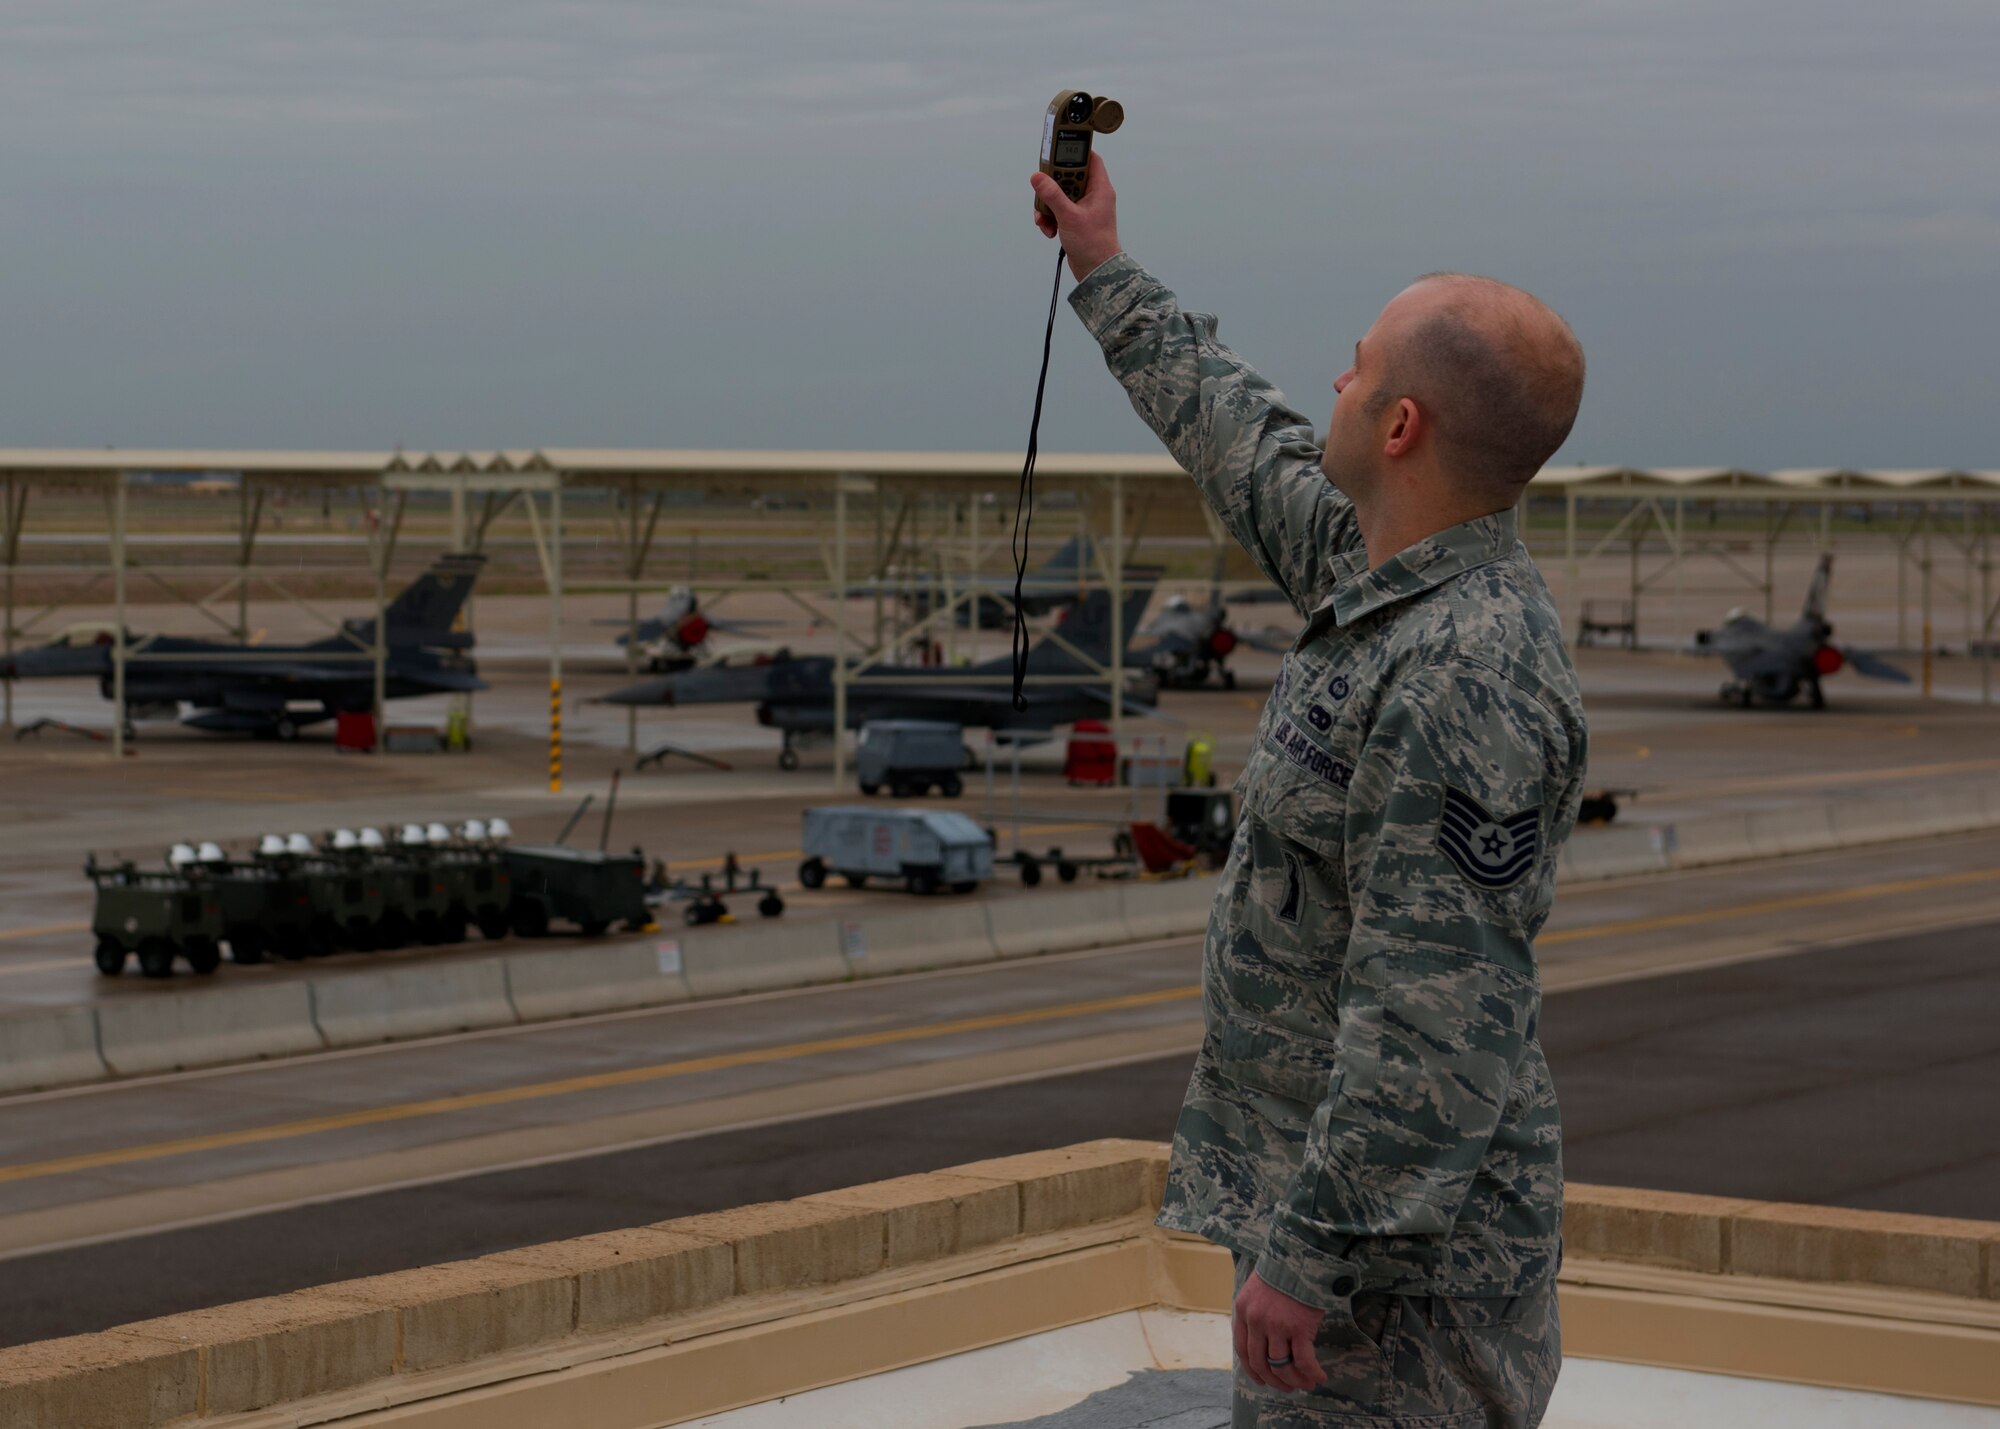 Tech Sgt. Sean Hilliard, 56th Operations Support Squadron Weather Flight craftsman, uses a Kestrel, a handheld wind and weather tracker, at Luke Air Force Base, Ariz., Feb. 14, 2019.